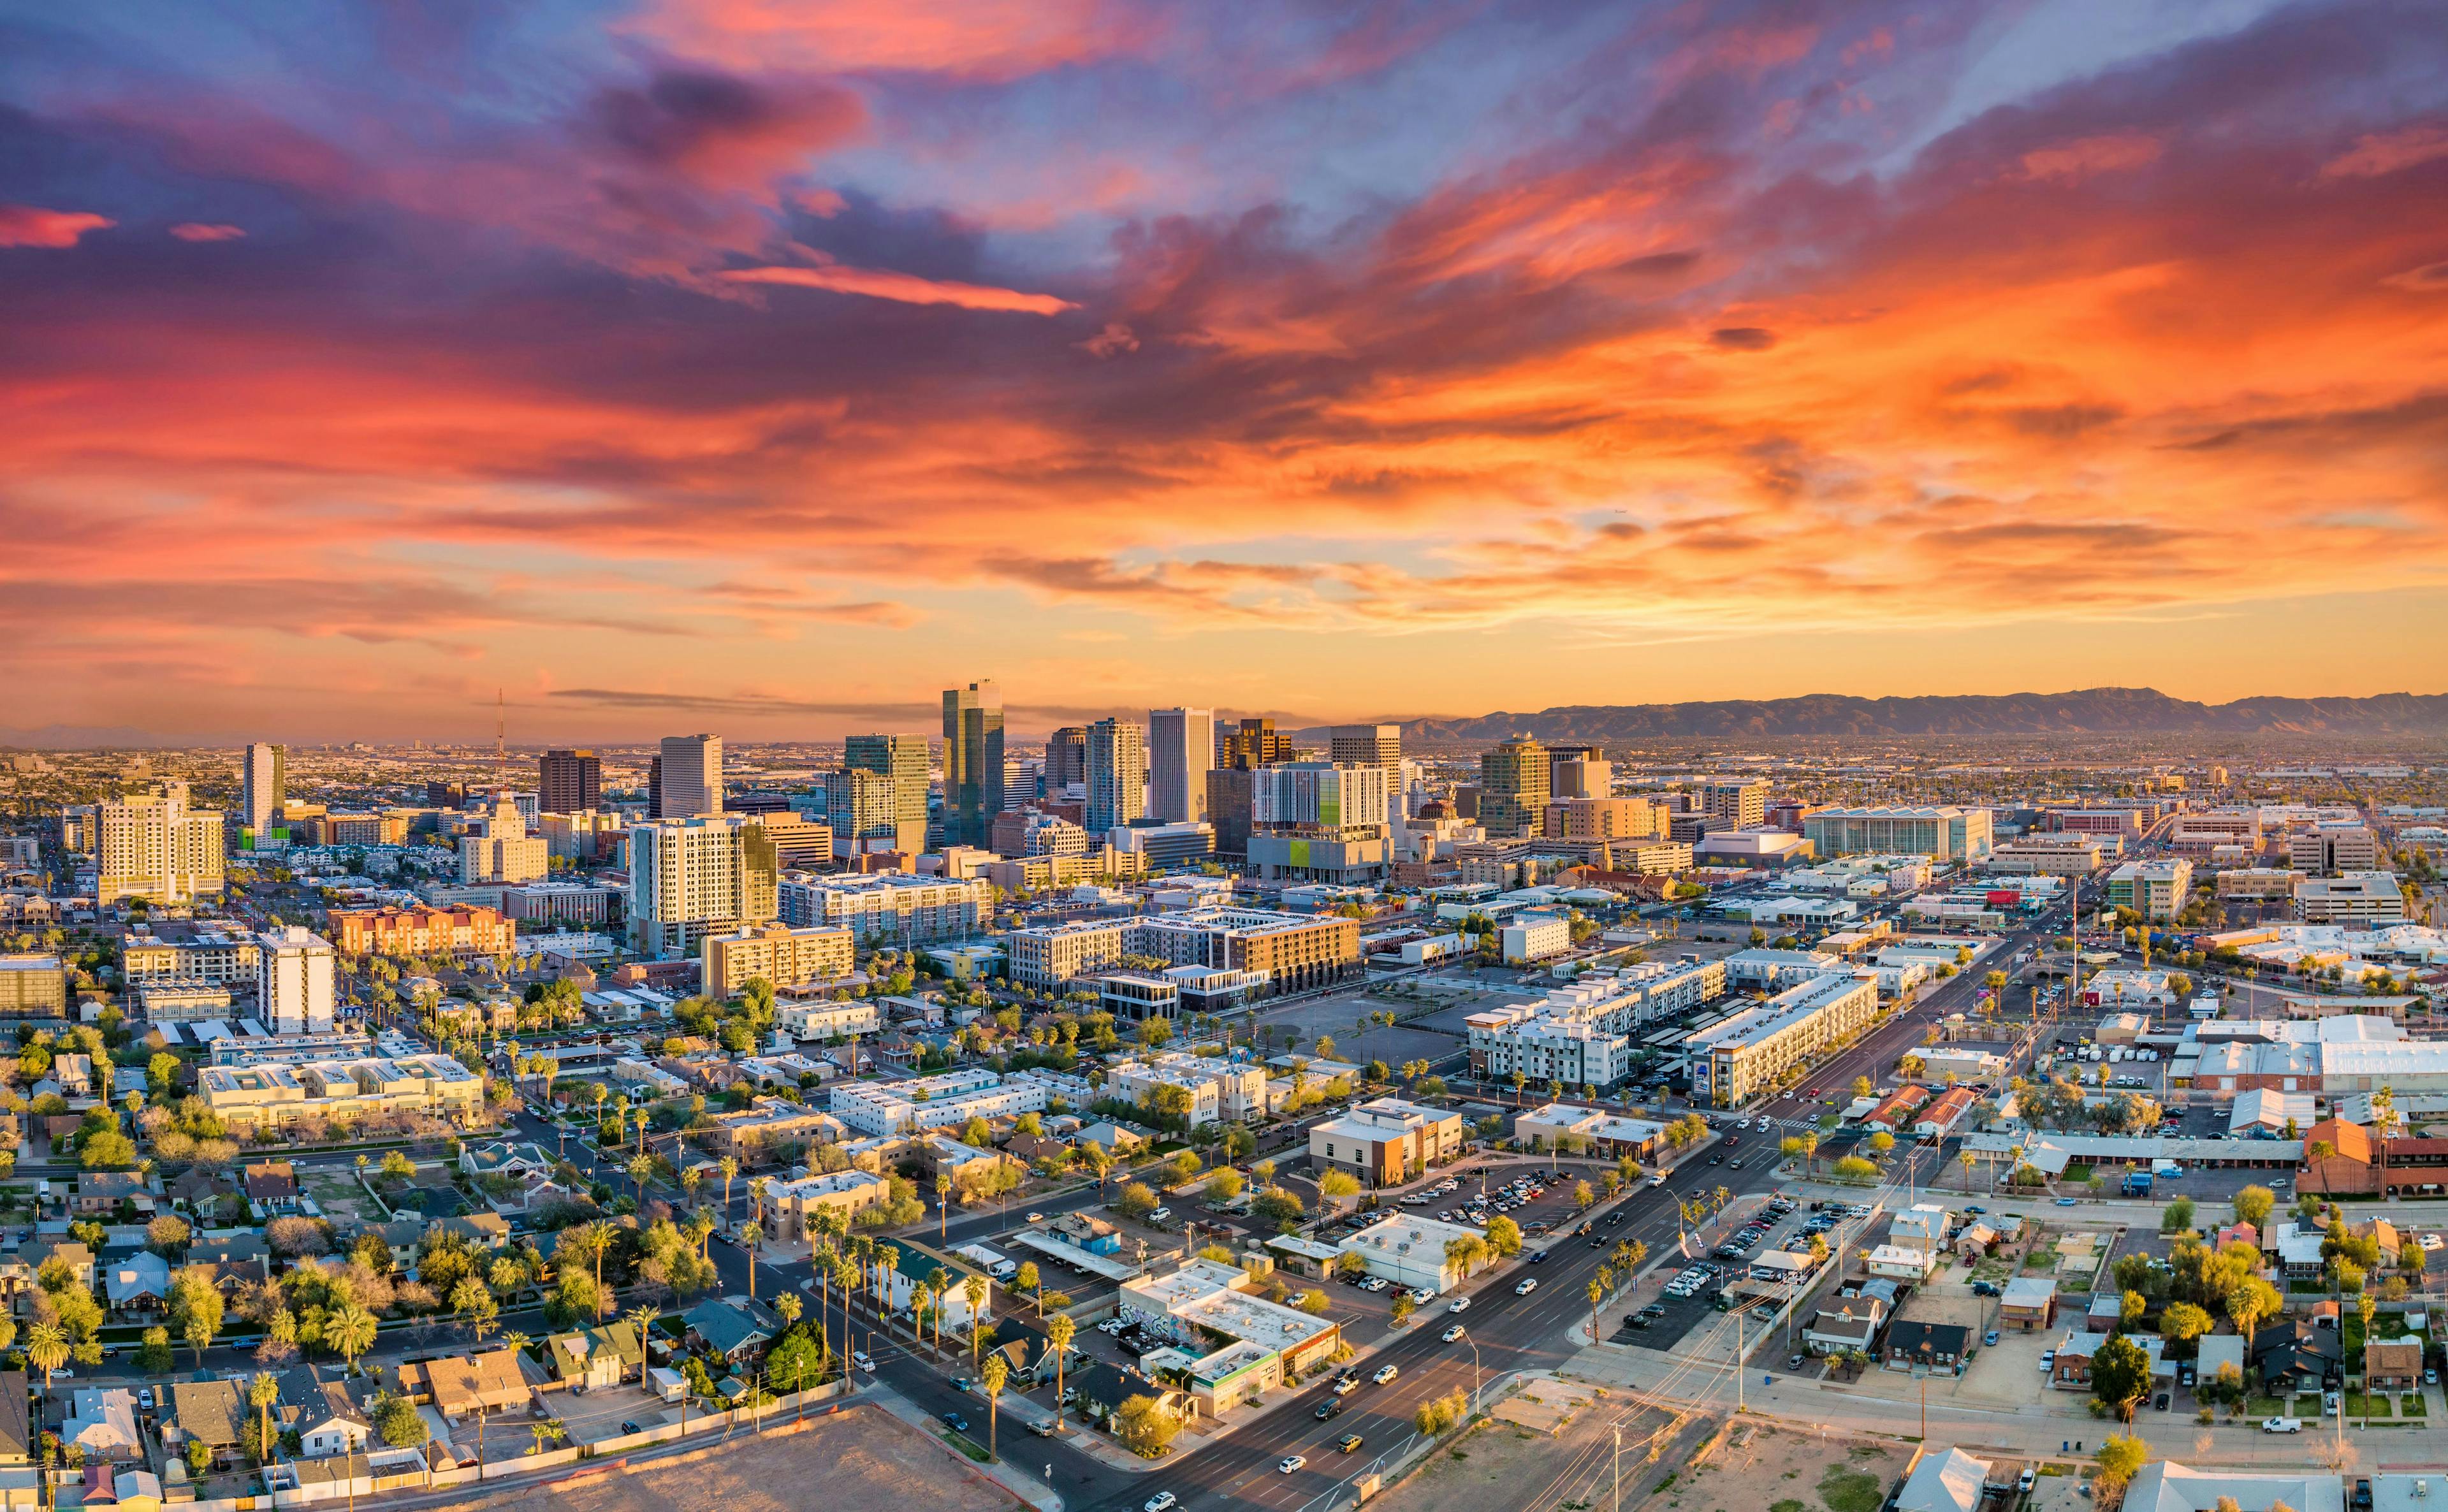 The first IKA Keratoconus Symposium: Front to Back and Everything In Between will take place April 22 and 23, 2023 in Scottsdale, Arizona. (Adobe Stock Image)